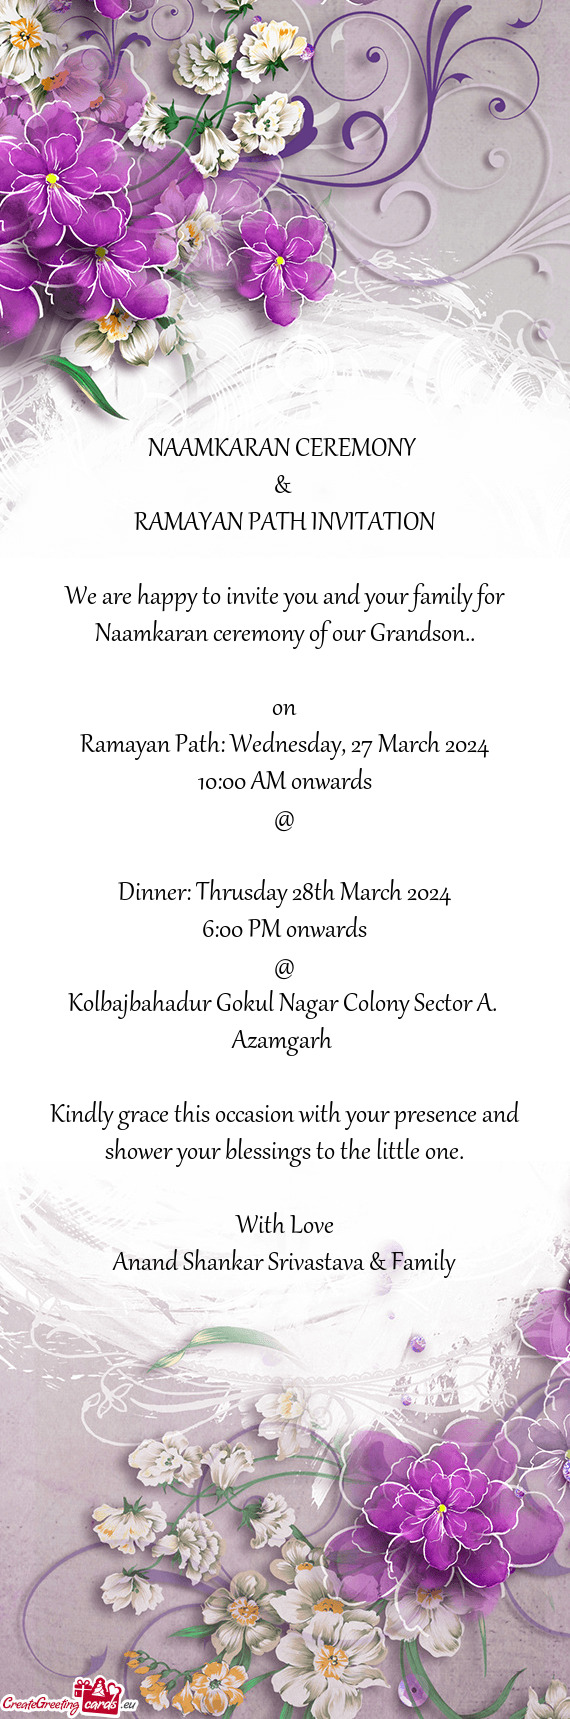 We are happy to invite you and your family for Naamkaran ceremony of our Grandson